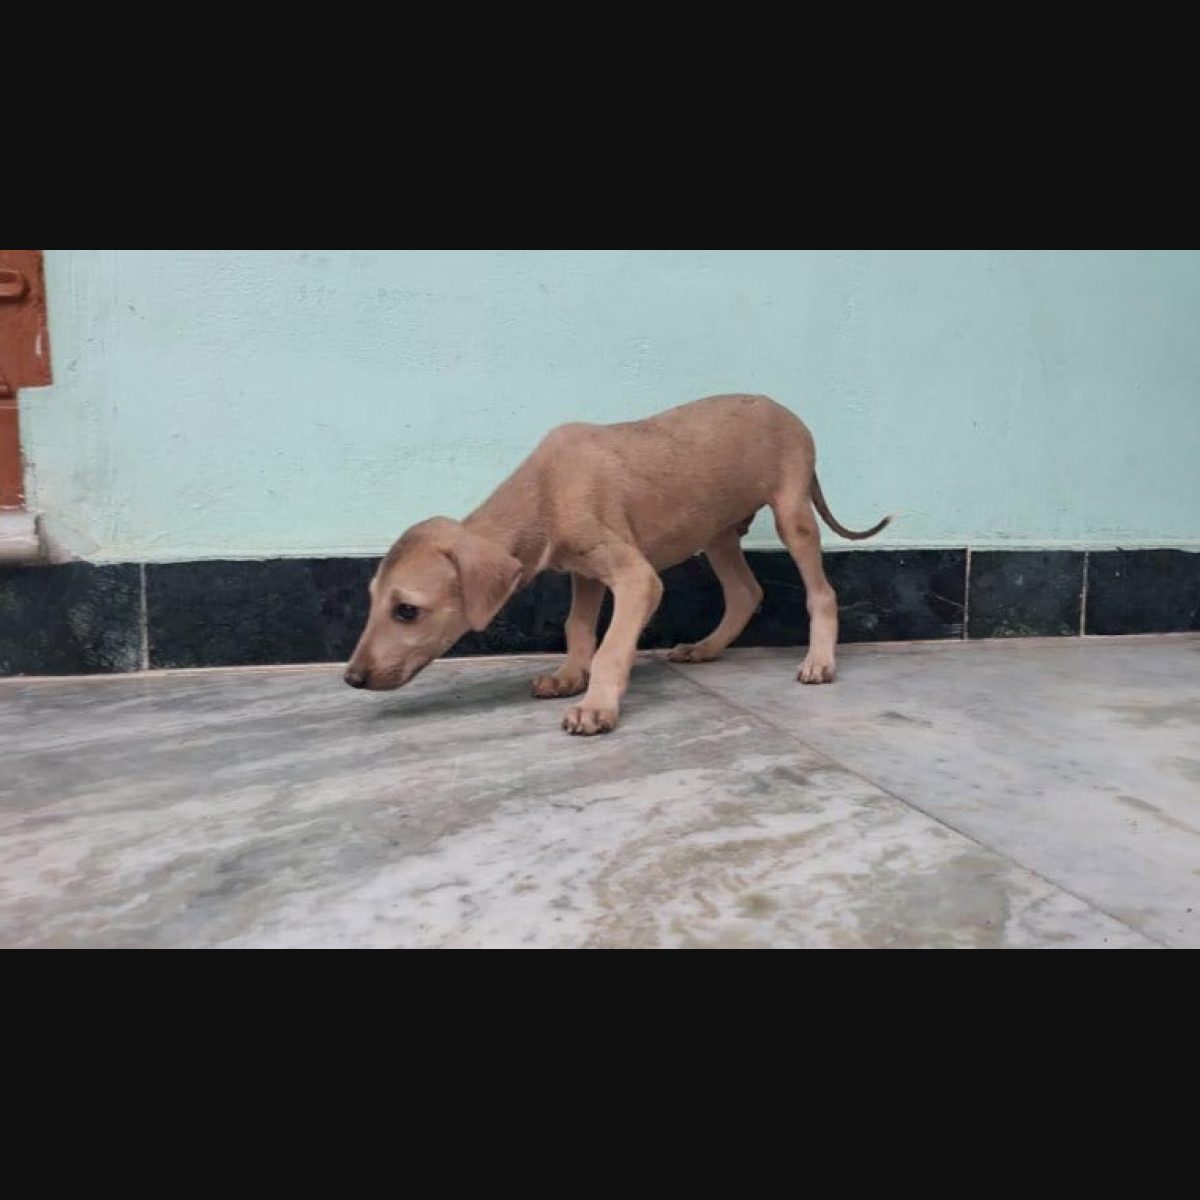 All you need to know about 'Chippiparai,' Tamil Nadu sprinter dog ...